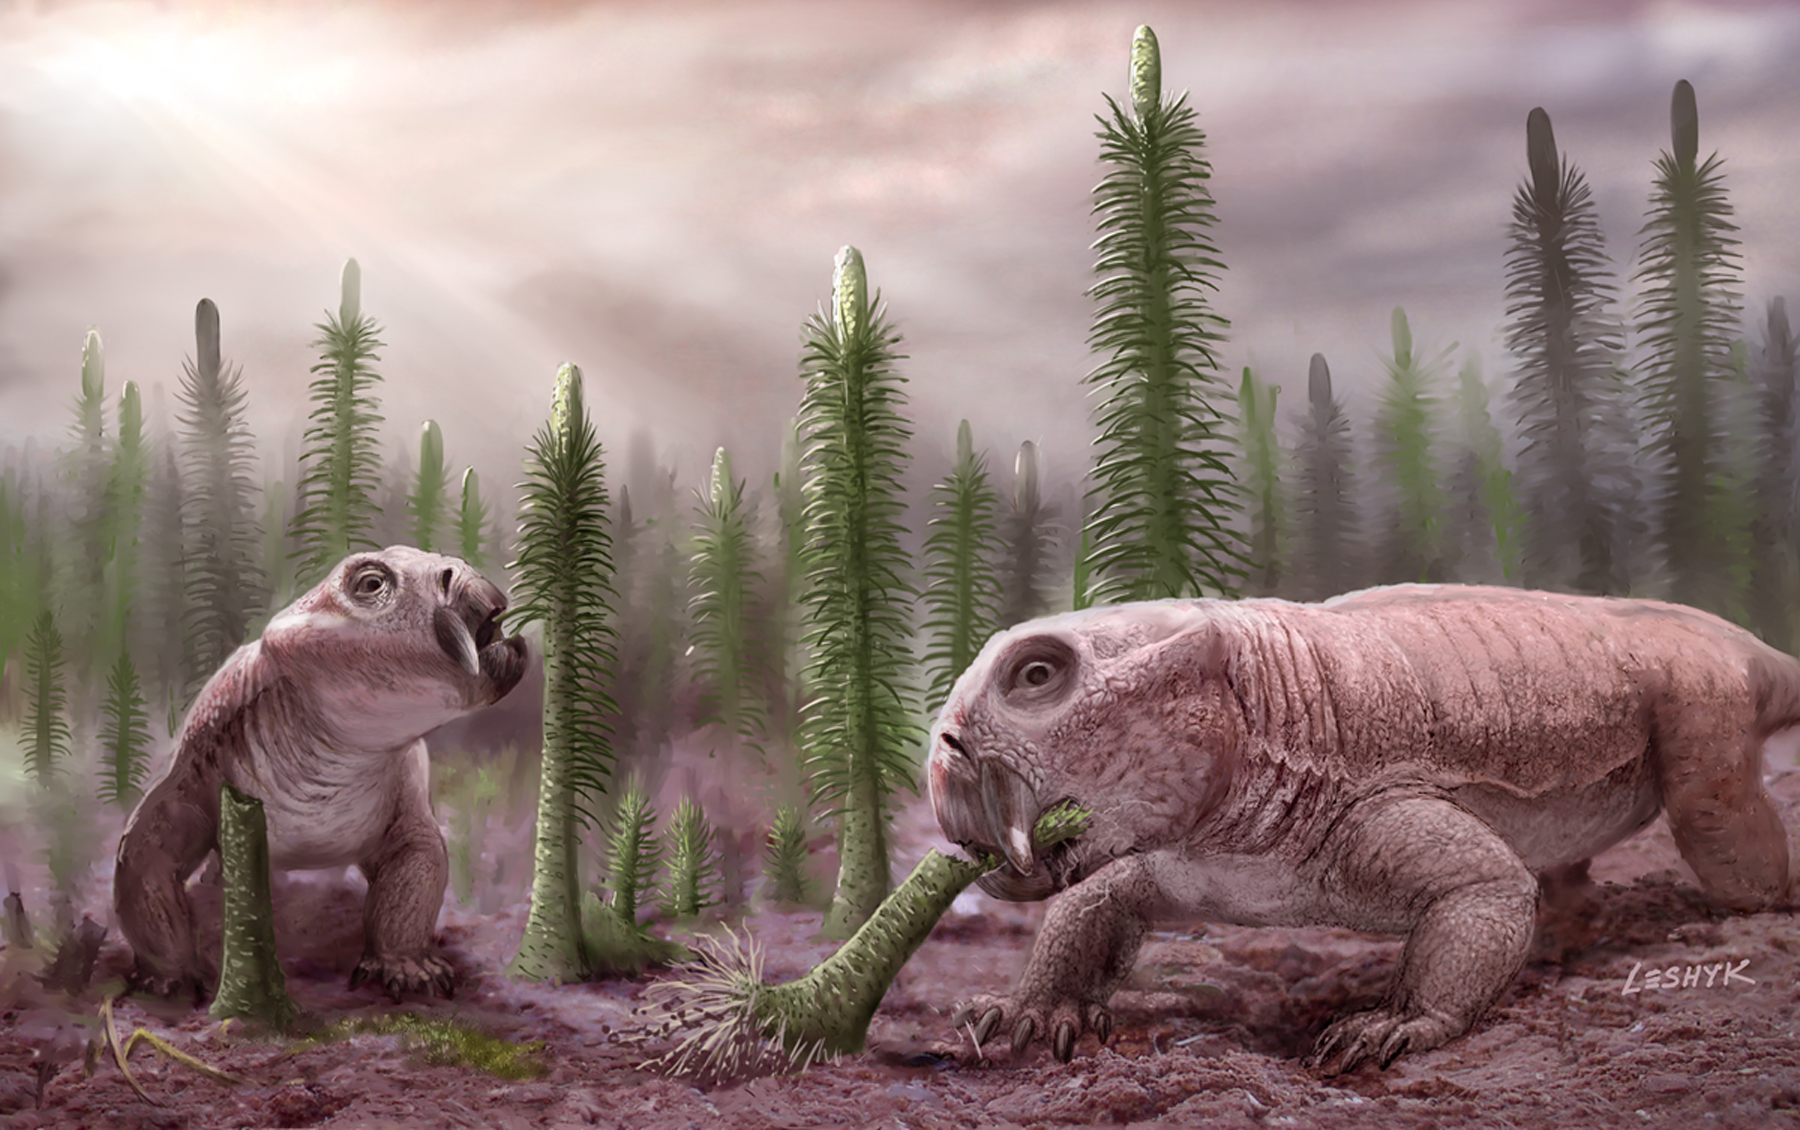 The dicynodont Lystrosaurus browses on a stand of the lycopsid plant Pleuromeia.  These species are two of the 'disaster taxa' that proliferated in the wake of the end-Permian mass extinction.